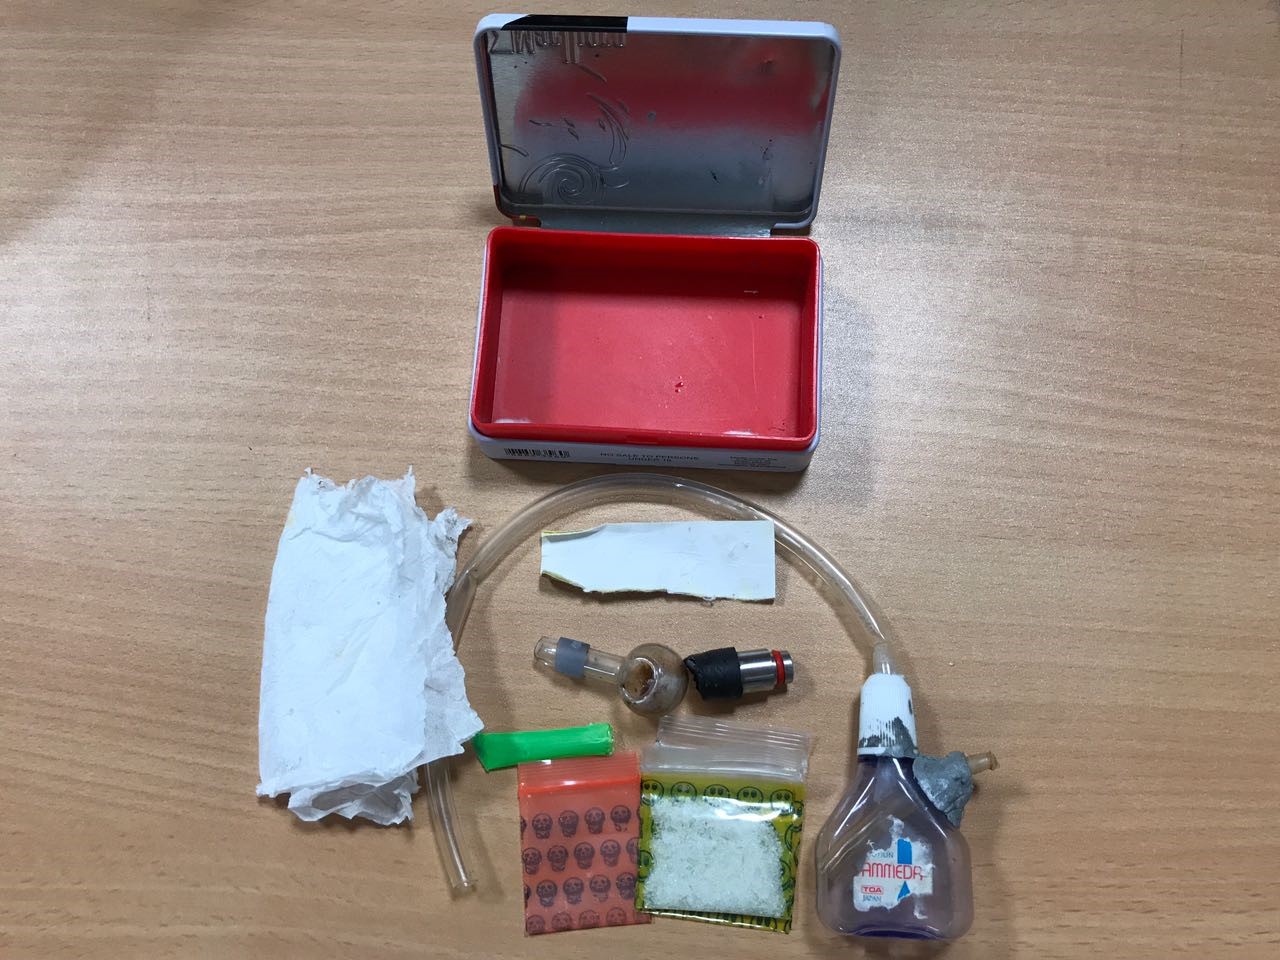 Photo 2: Improvised drug-smoking apparatus seized during one the CNB island-wide operation from 31 July to 4 August 2017